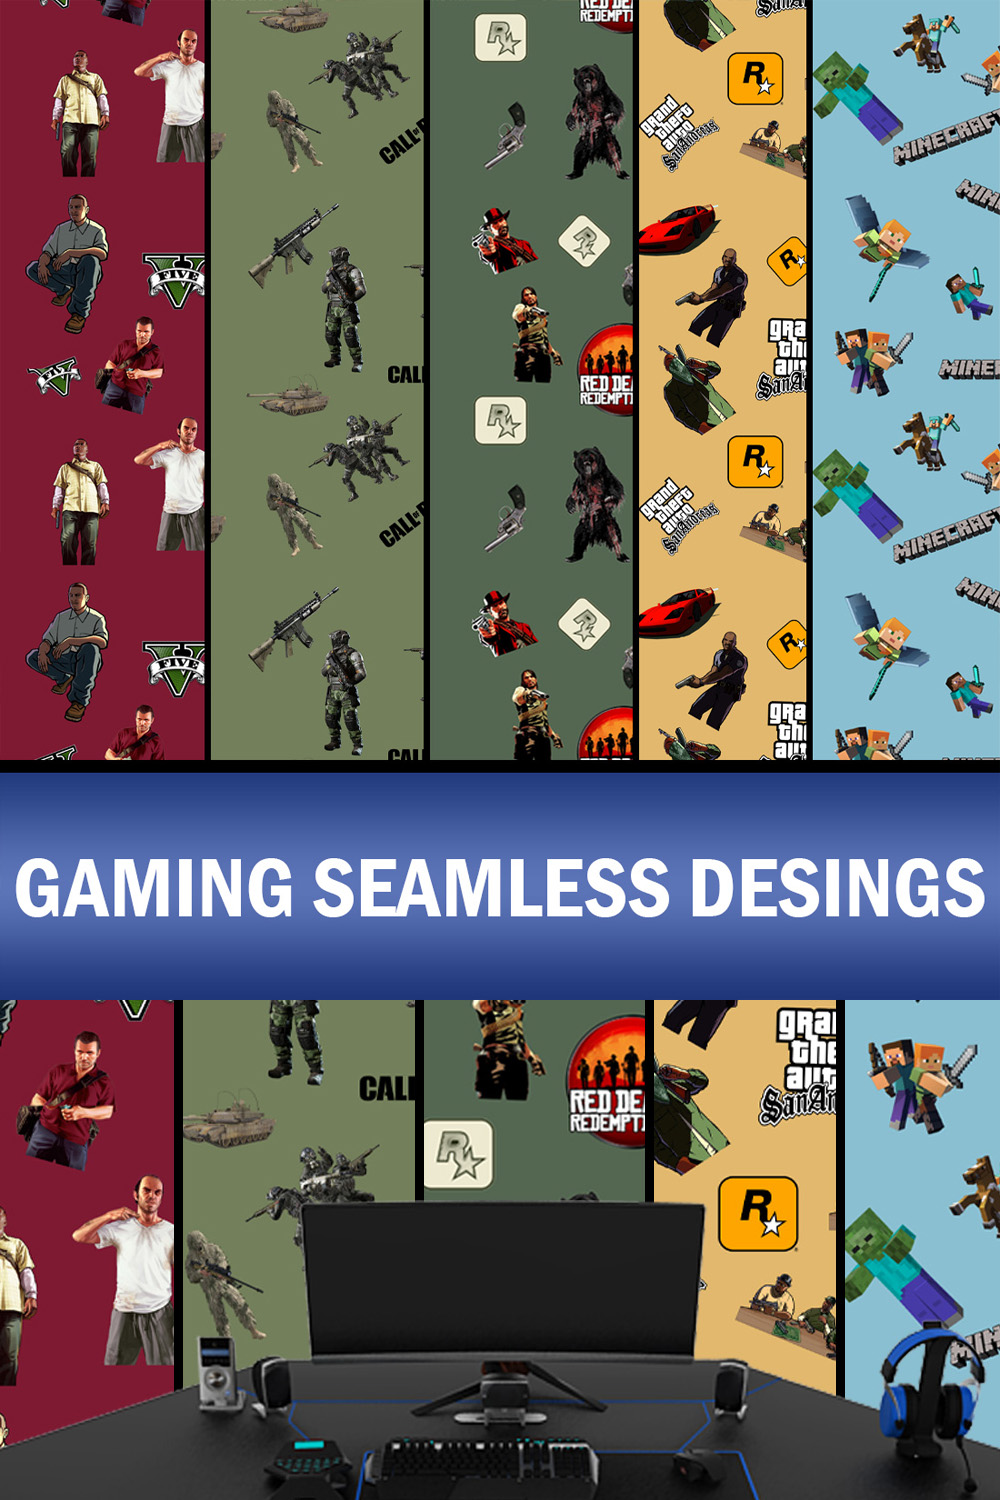 Gaming seamless designs for room décor and desings pinterest preview image.